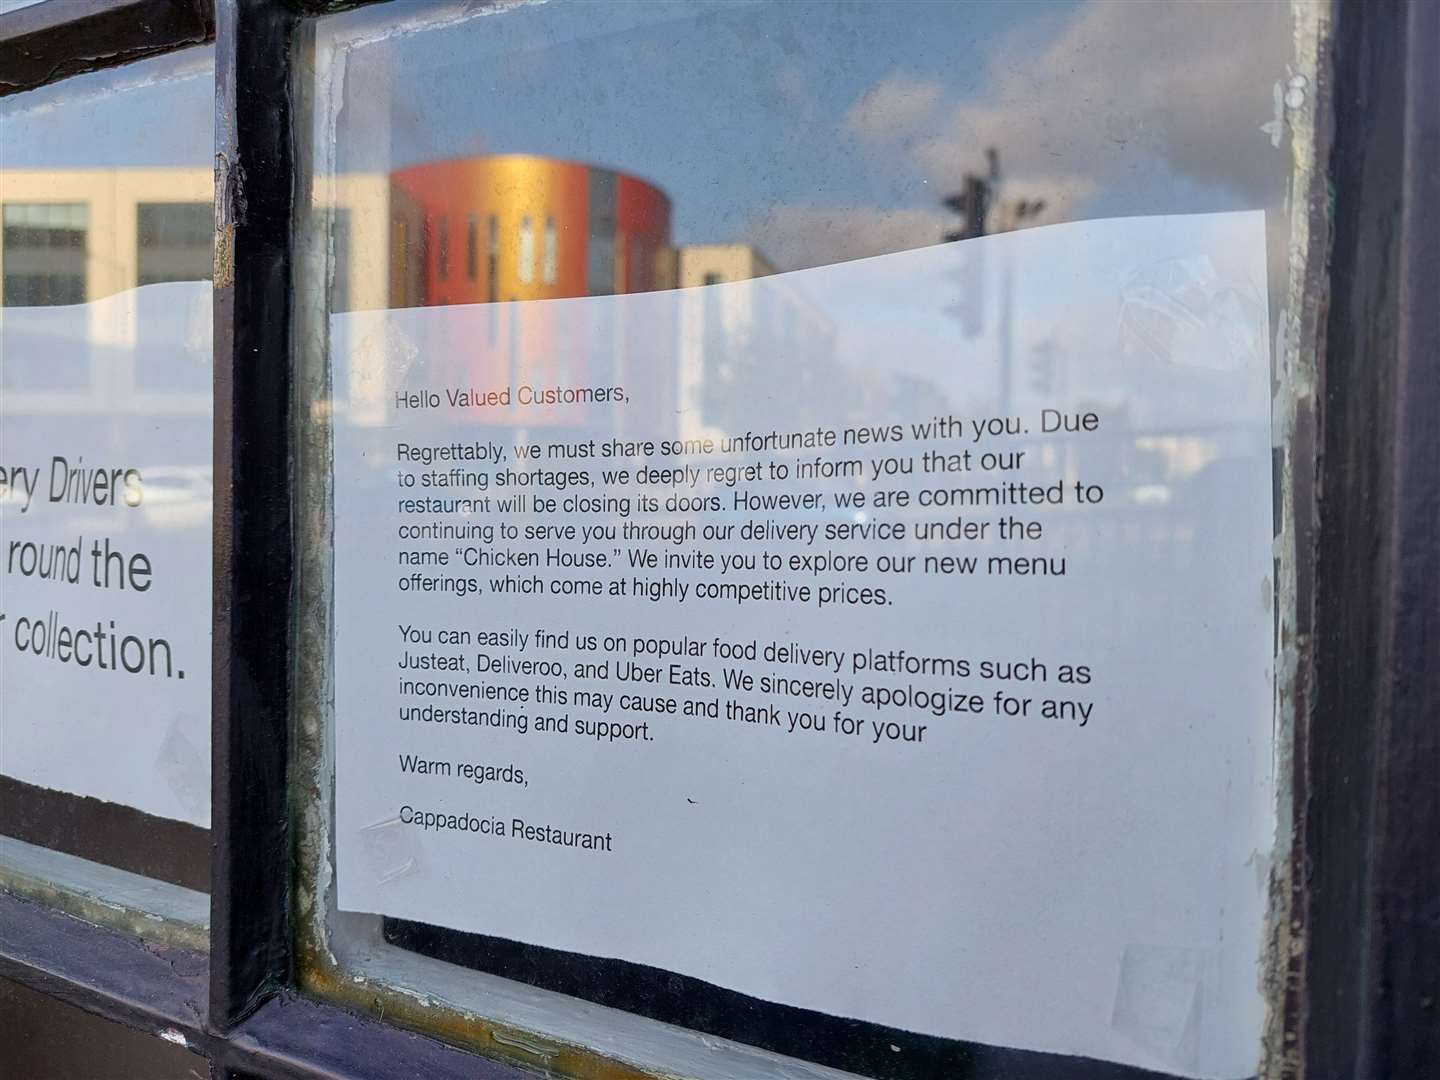 A notice displayed on the window of the Cappadocia restaurant